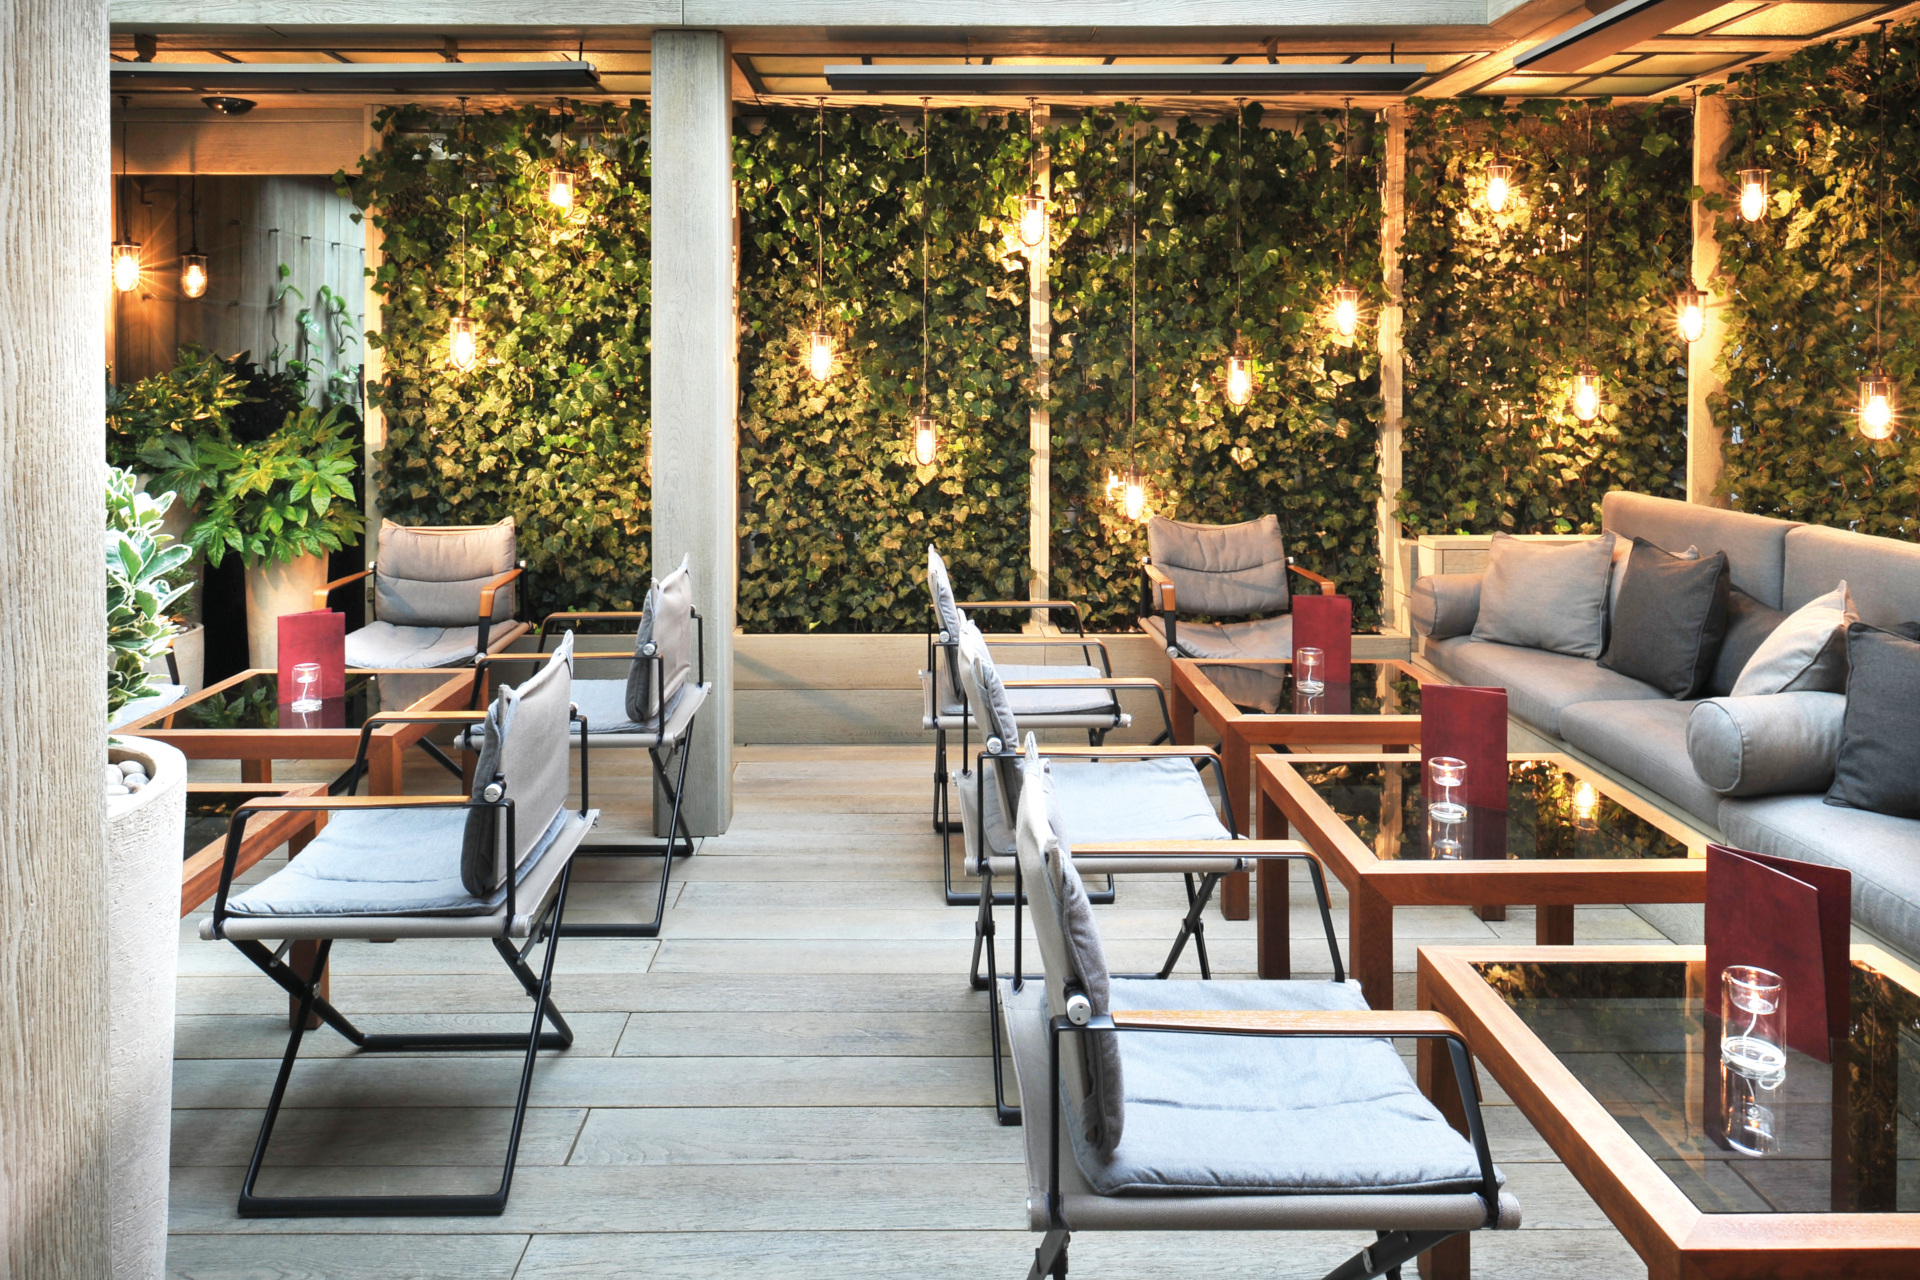 Outdoor terrace with dining area and fairy lights